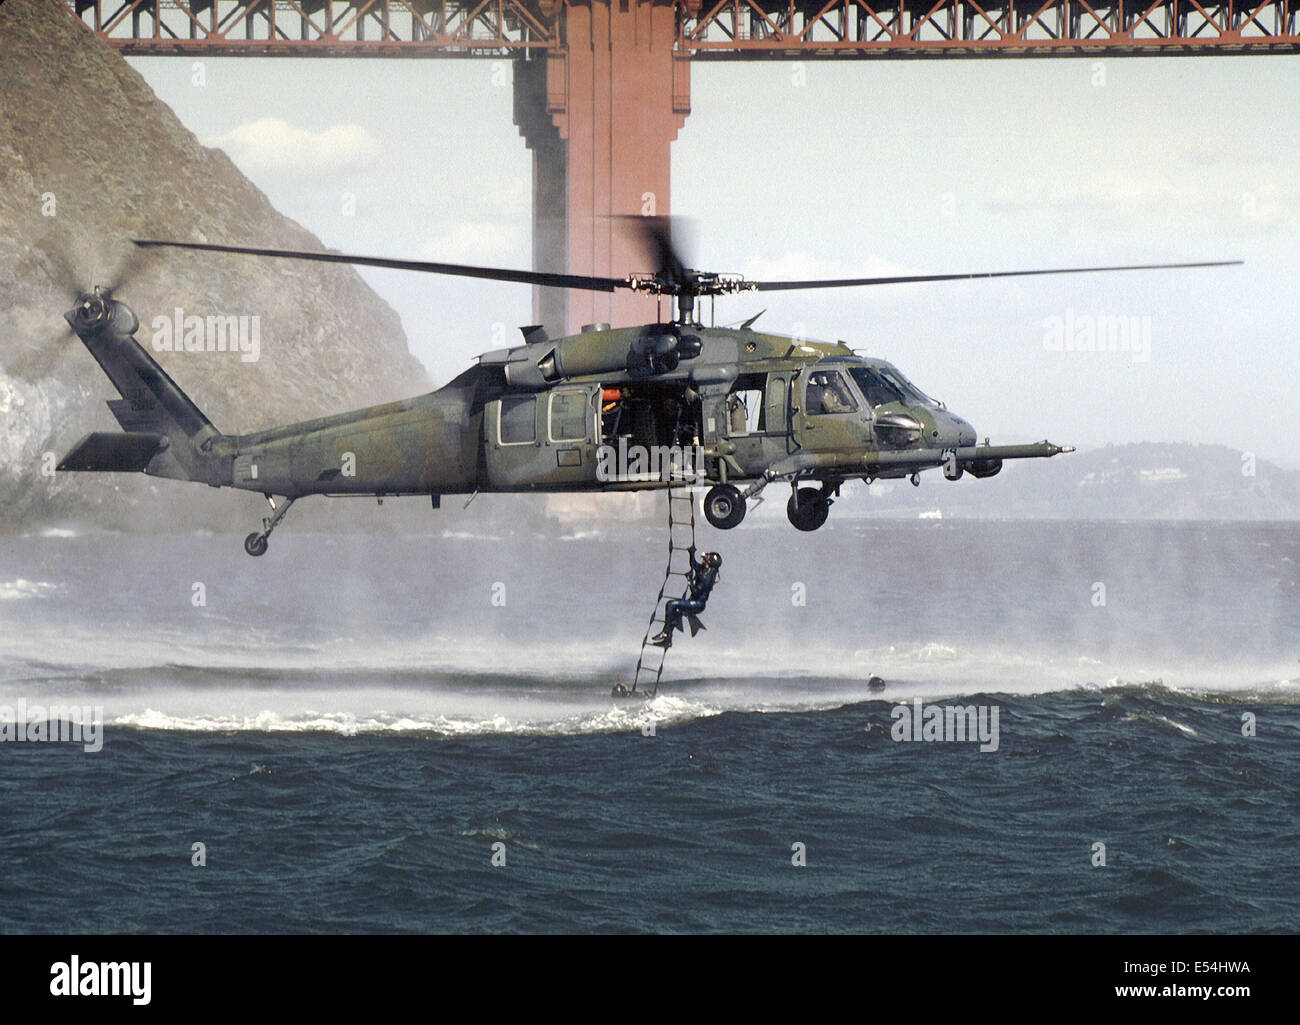 California Air National Guard pararescue soldiers with the 129th Rescue Wing climb into a HH-60G Pave Hawk helicopter using a rope ladder from the chilly waters near the Golden Gate Bridge July 14, 2000 in San Francisco, CA. Stock Photo